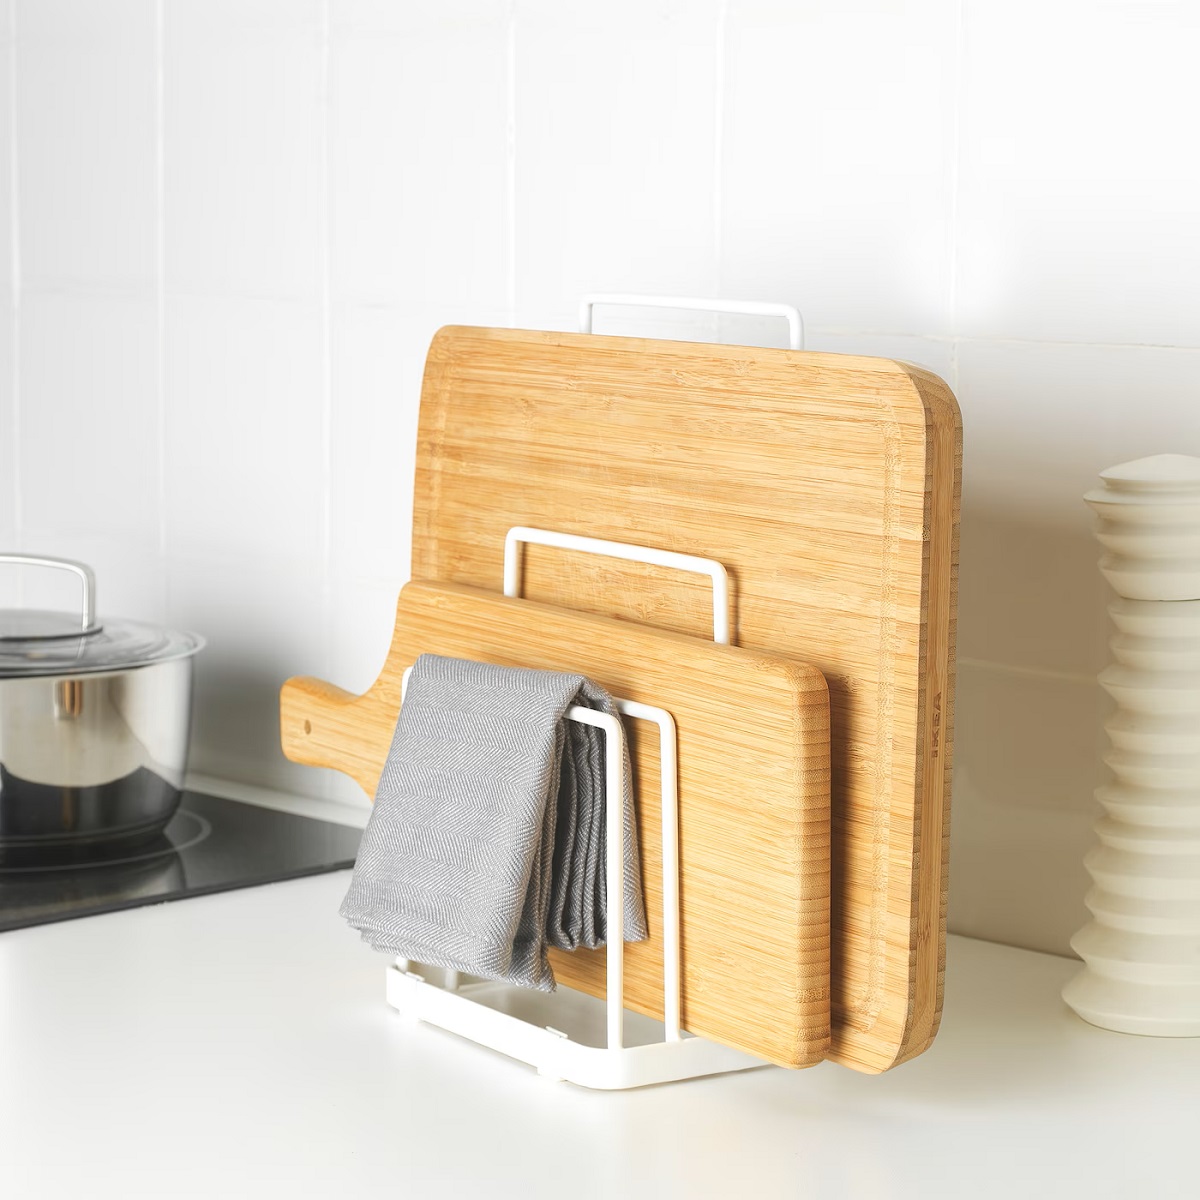 How To Store Cutting Boards In Kitchen